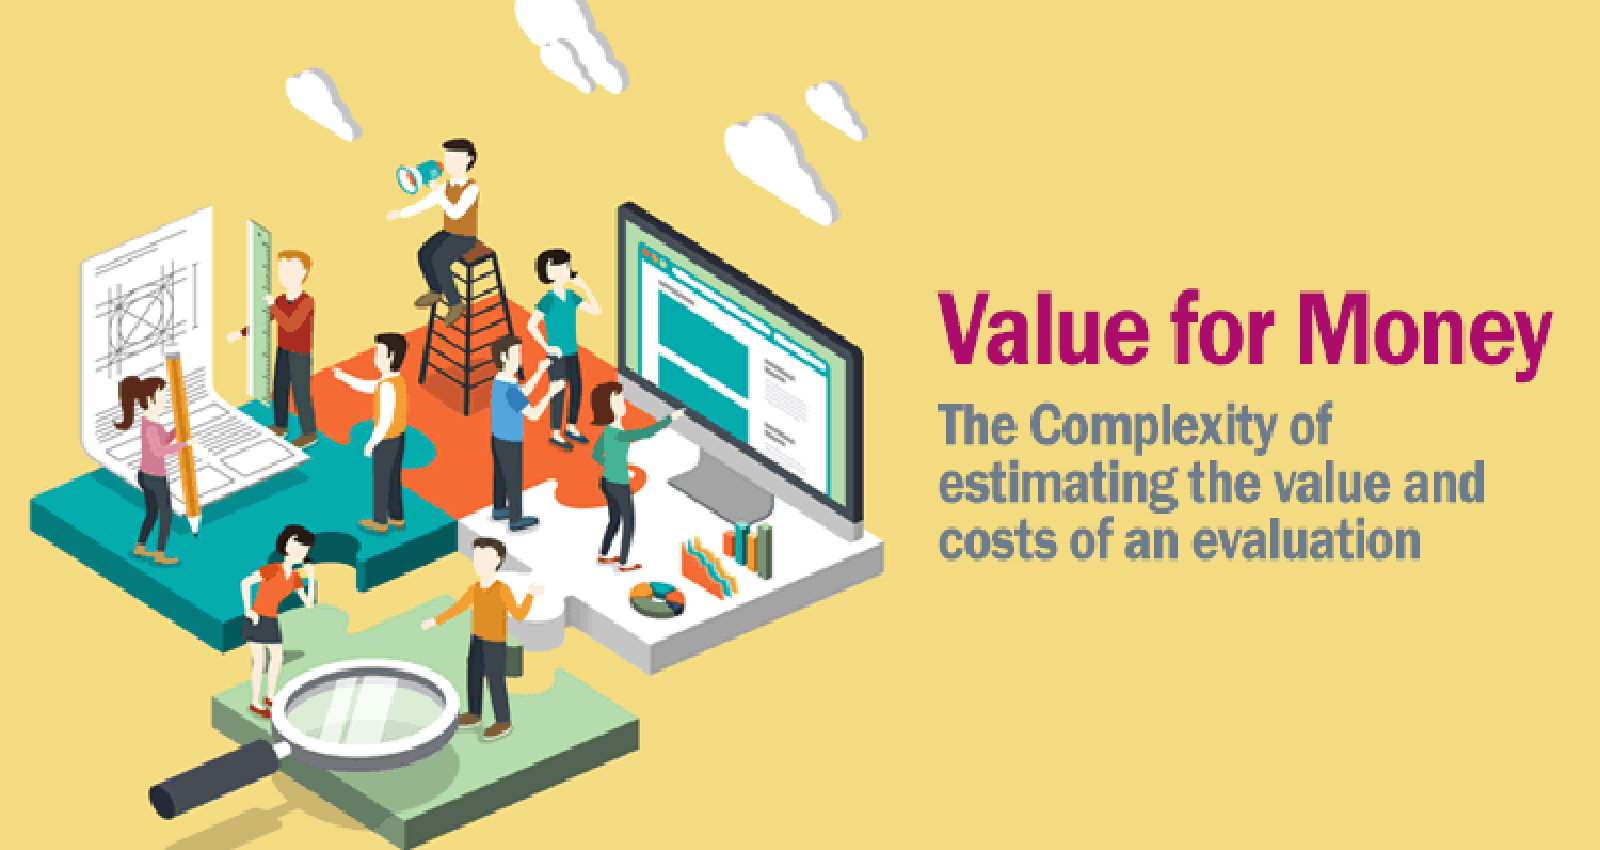 The Complexity of estimating the value and costs of an evaluation